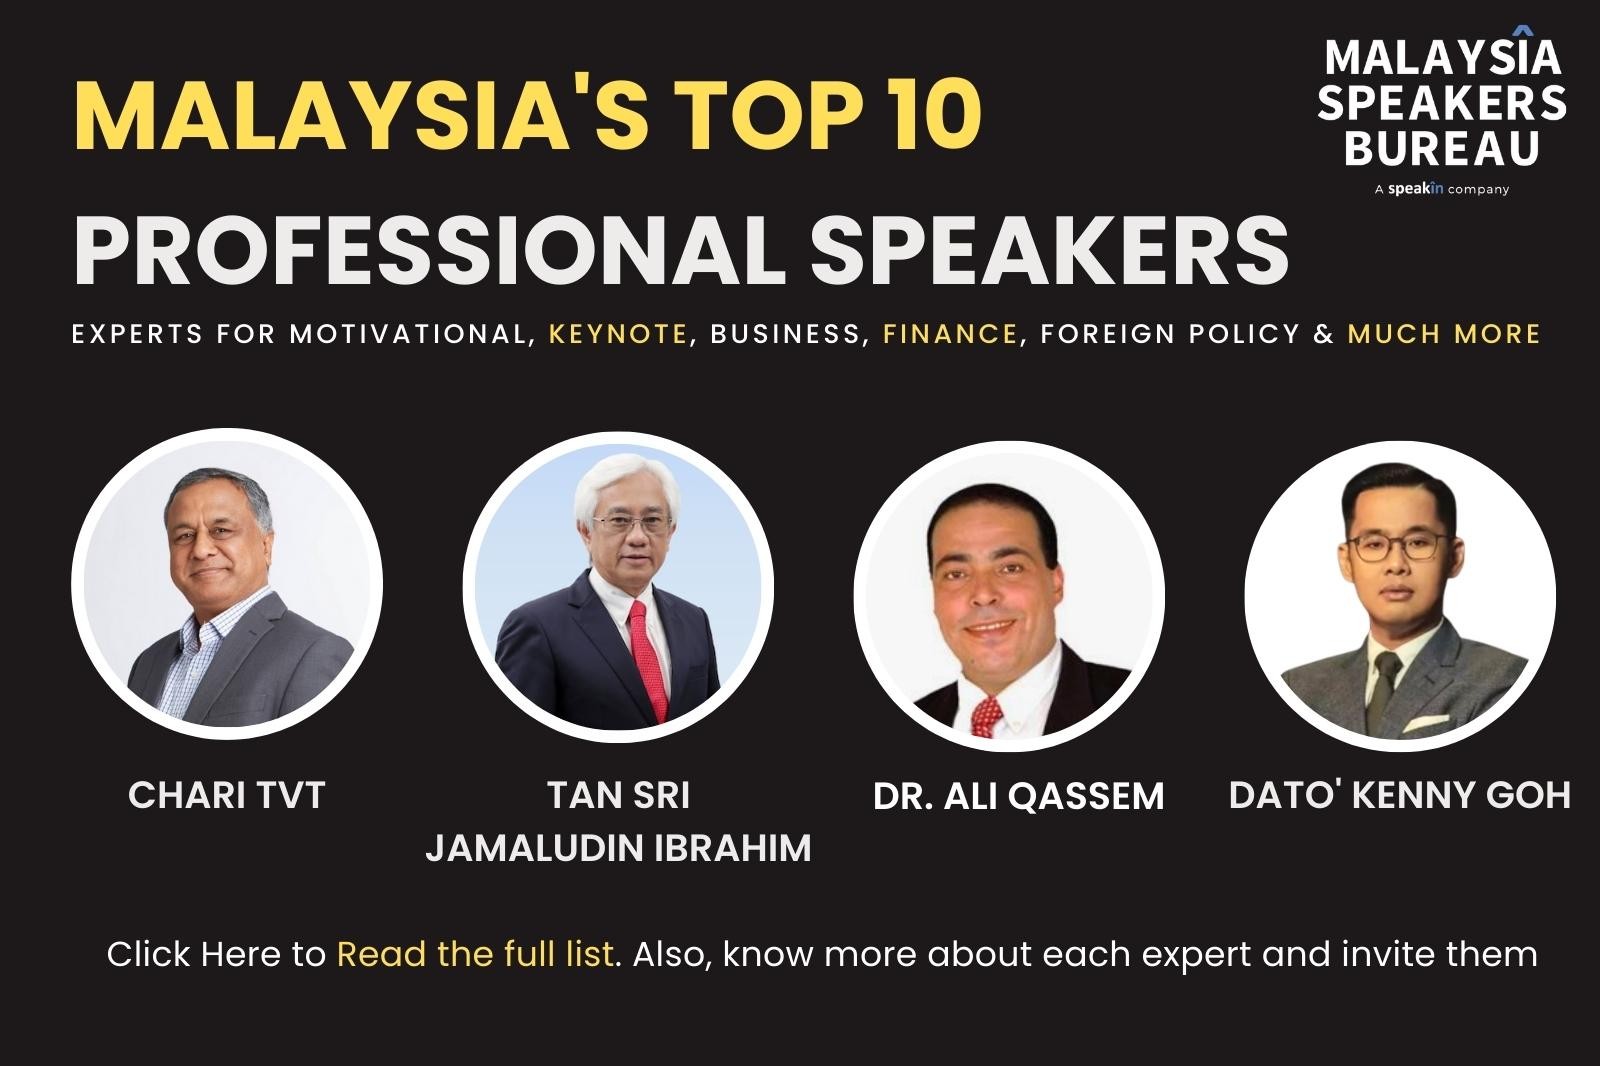 Top 10 Professional Speakers in Malaysia: Motivational, Keynote, Business, Tech & Others